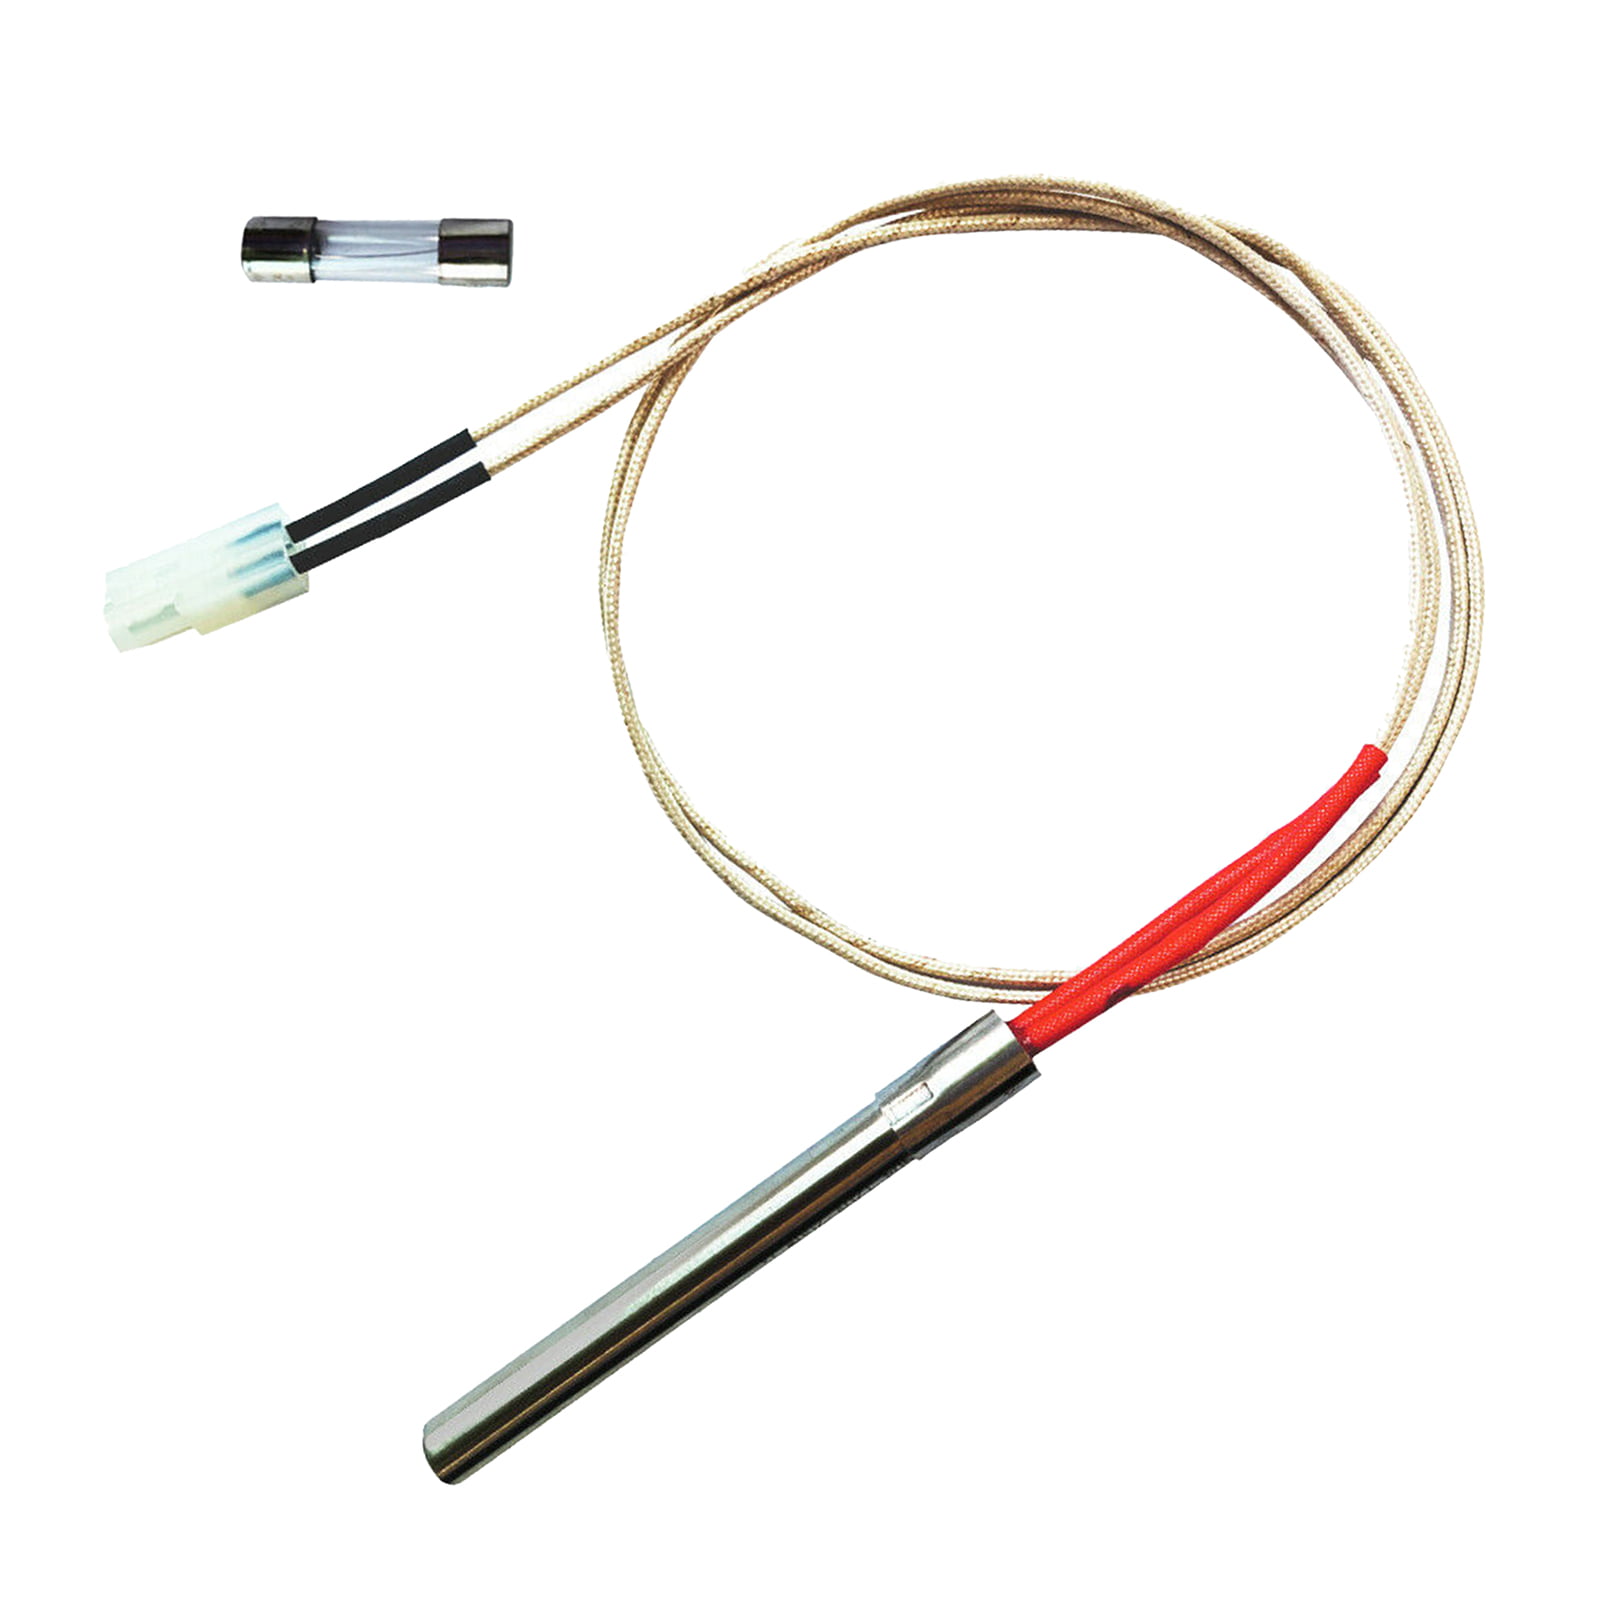 High qualityTRAEGER REPLACEMENT HOT ROD igniter  INCLUDES FUSE AND INSTRUCTIONS 